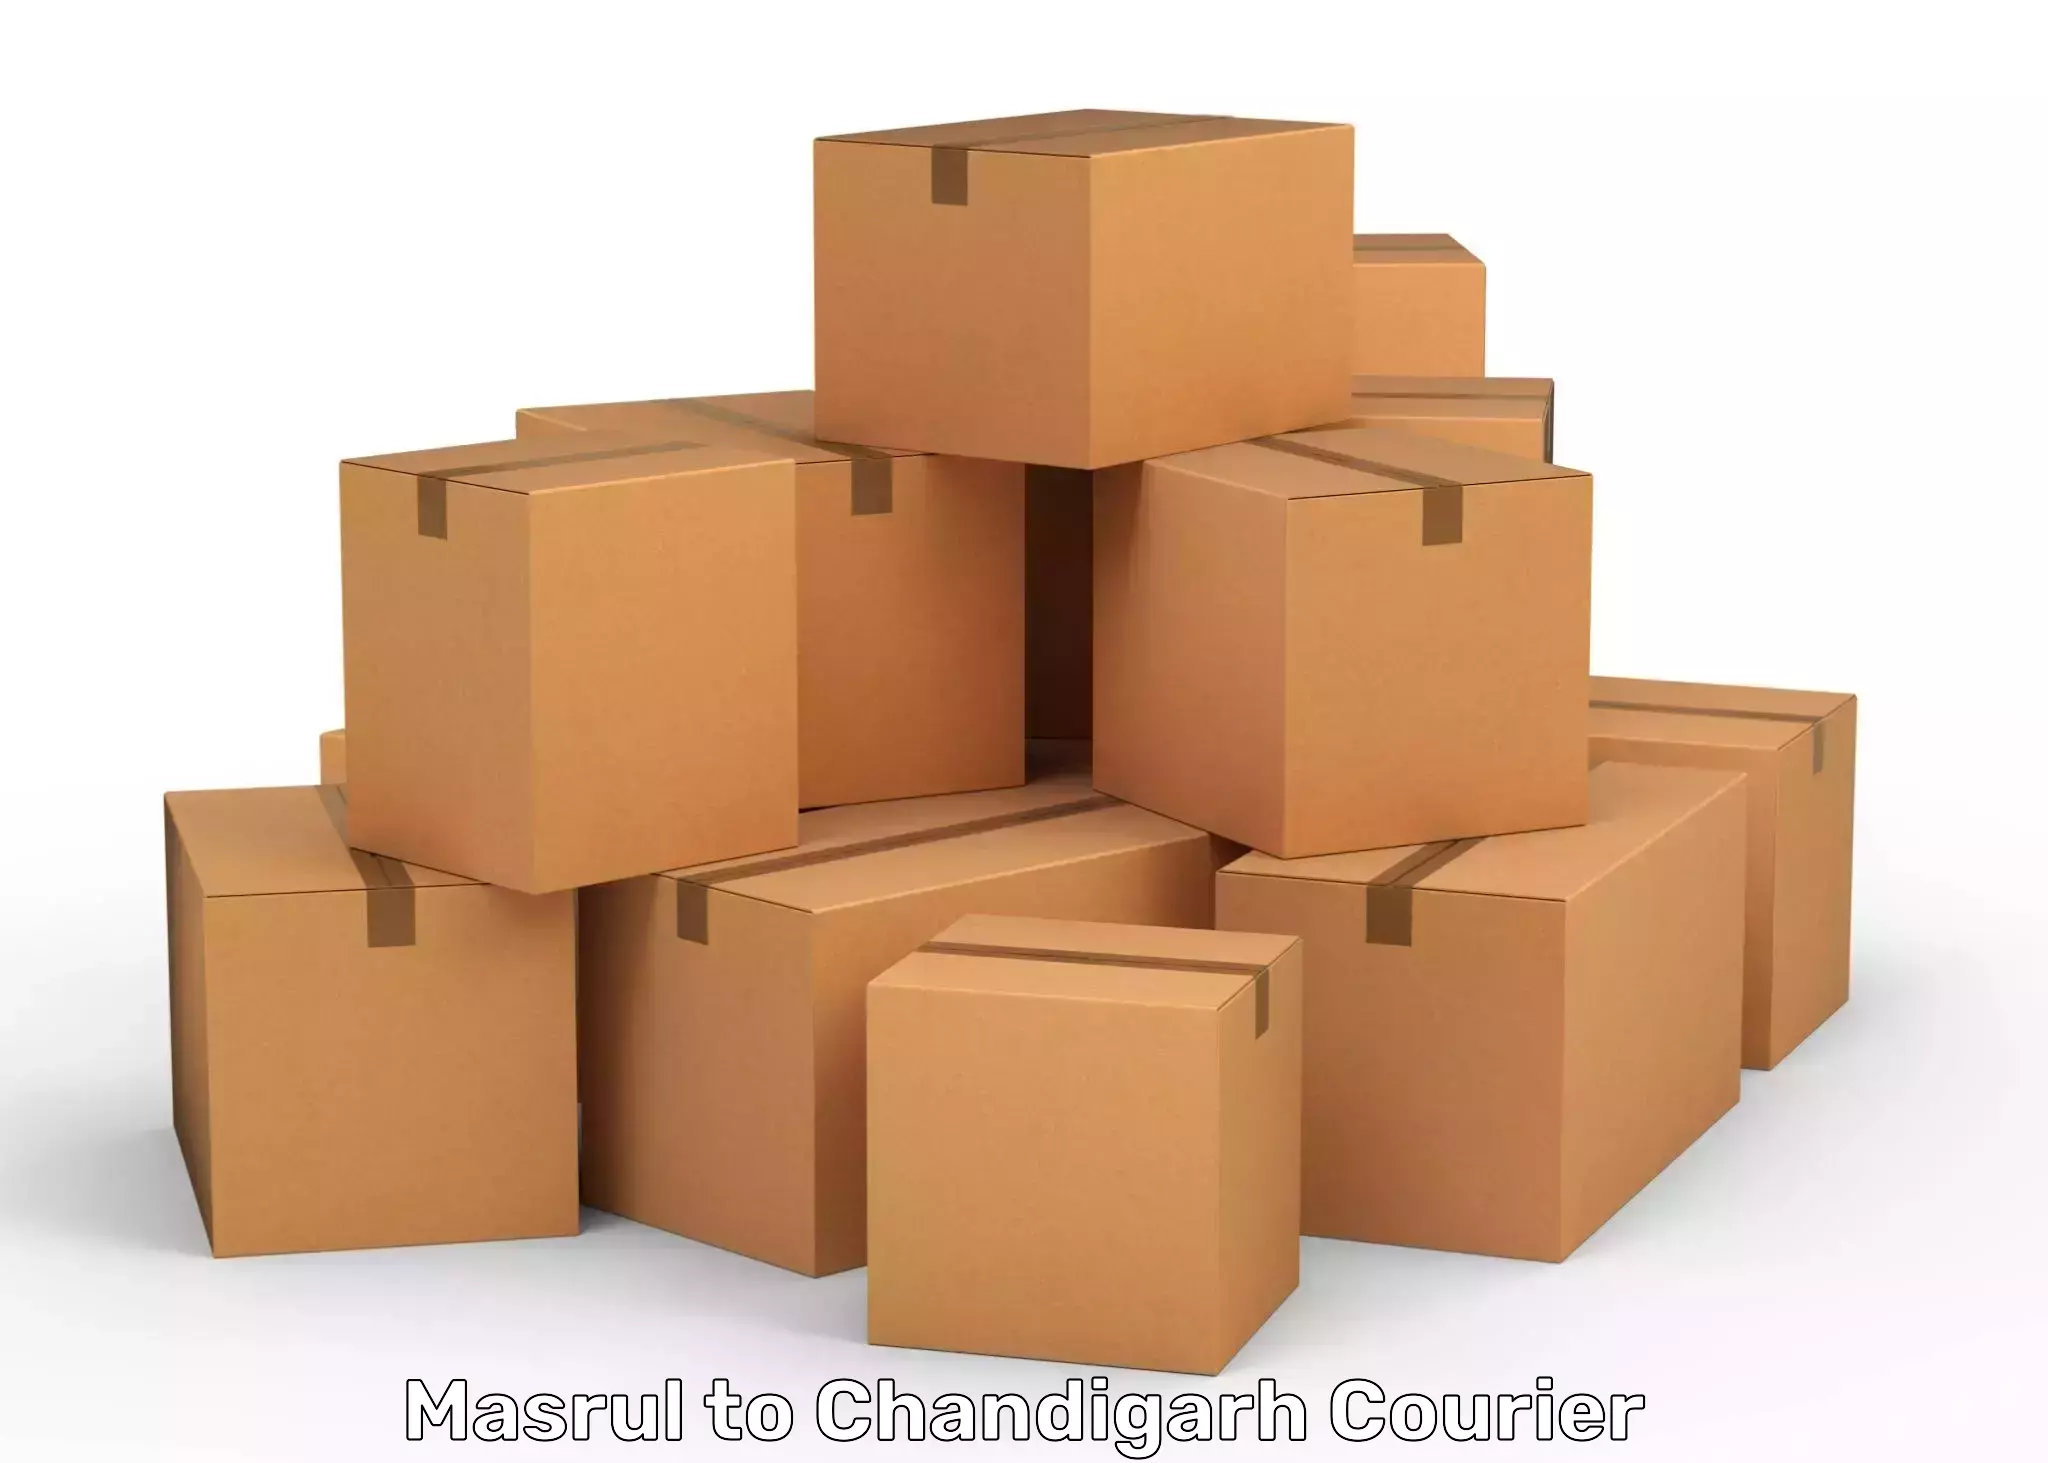 Nationwide shipping coverage Masrul to Chandigarh